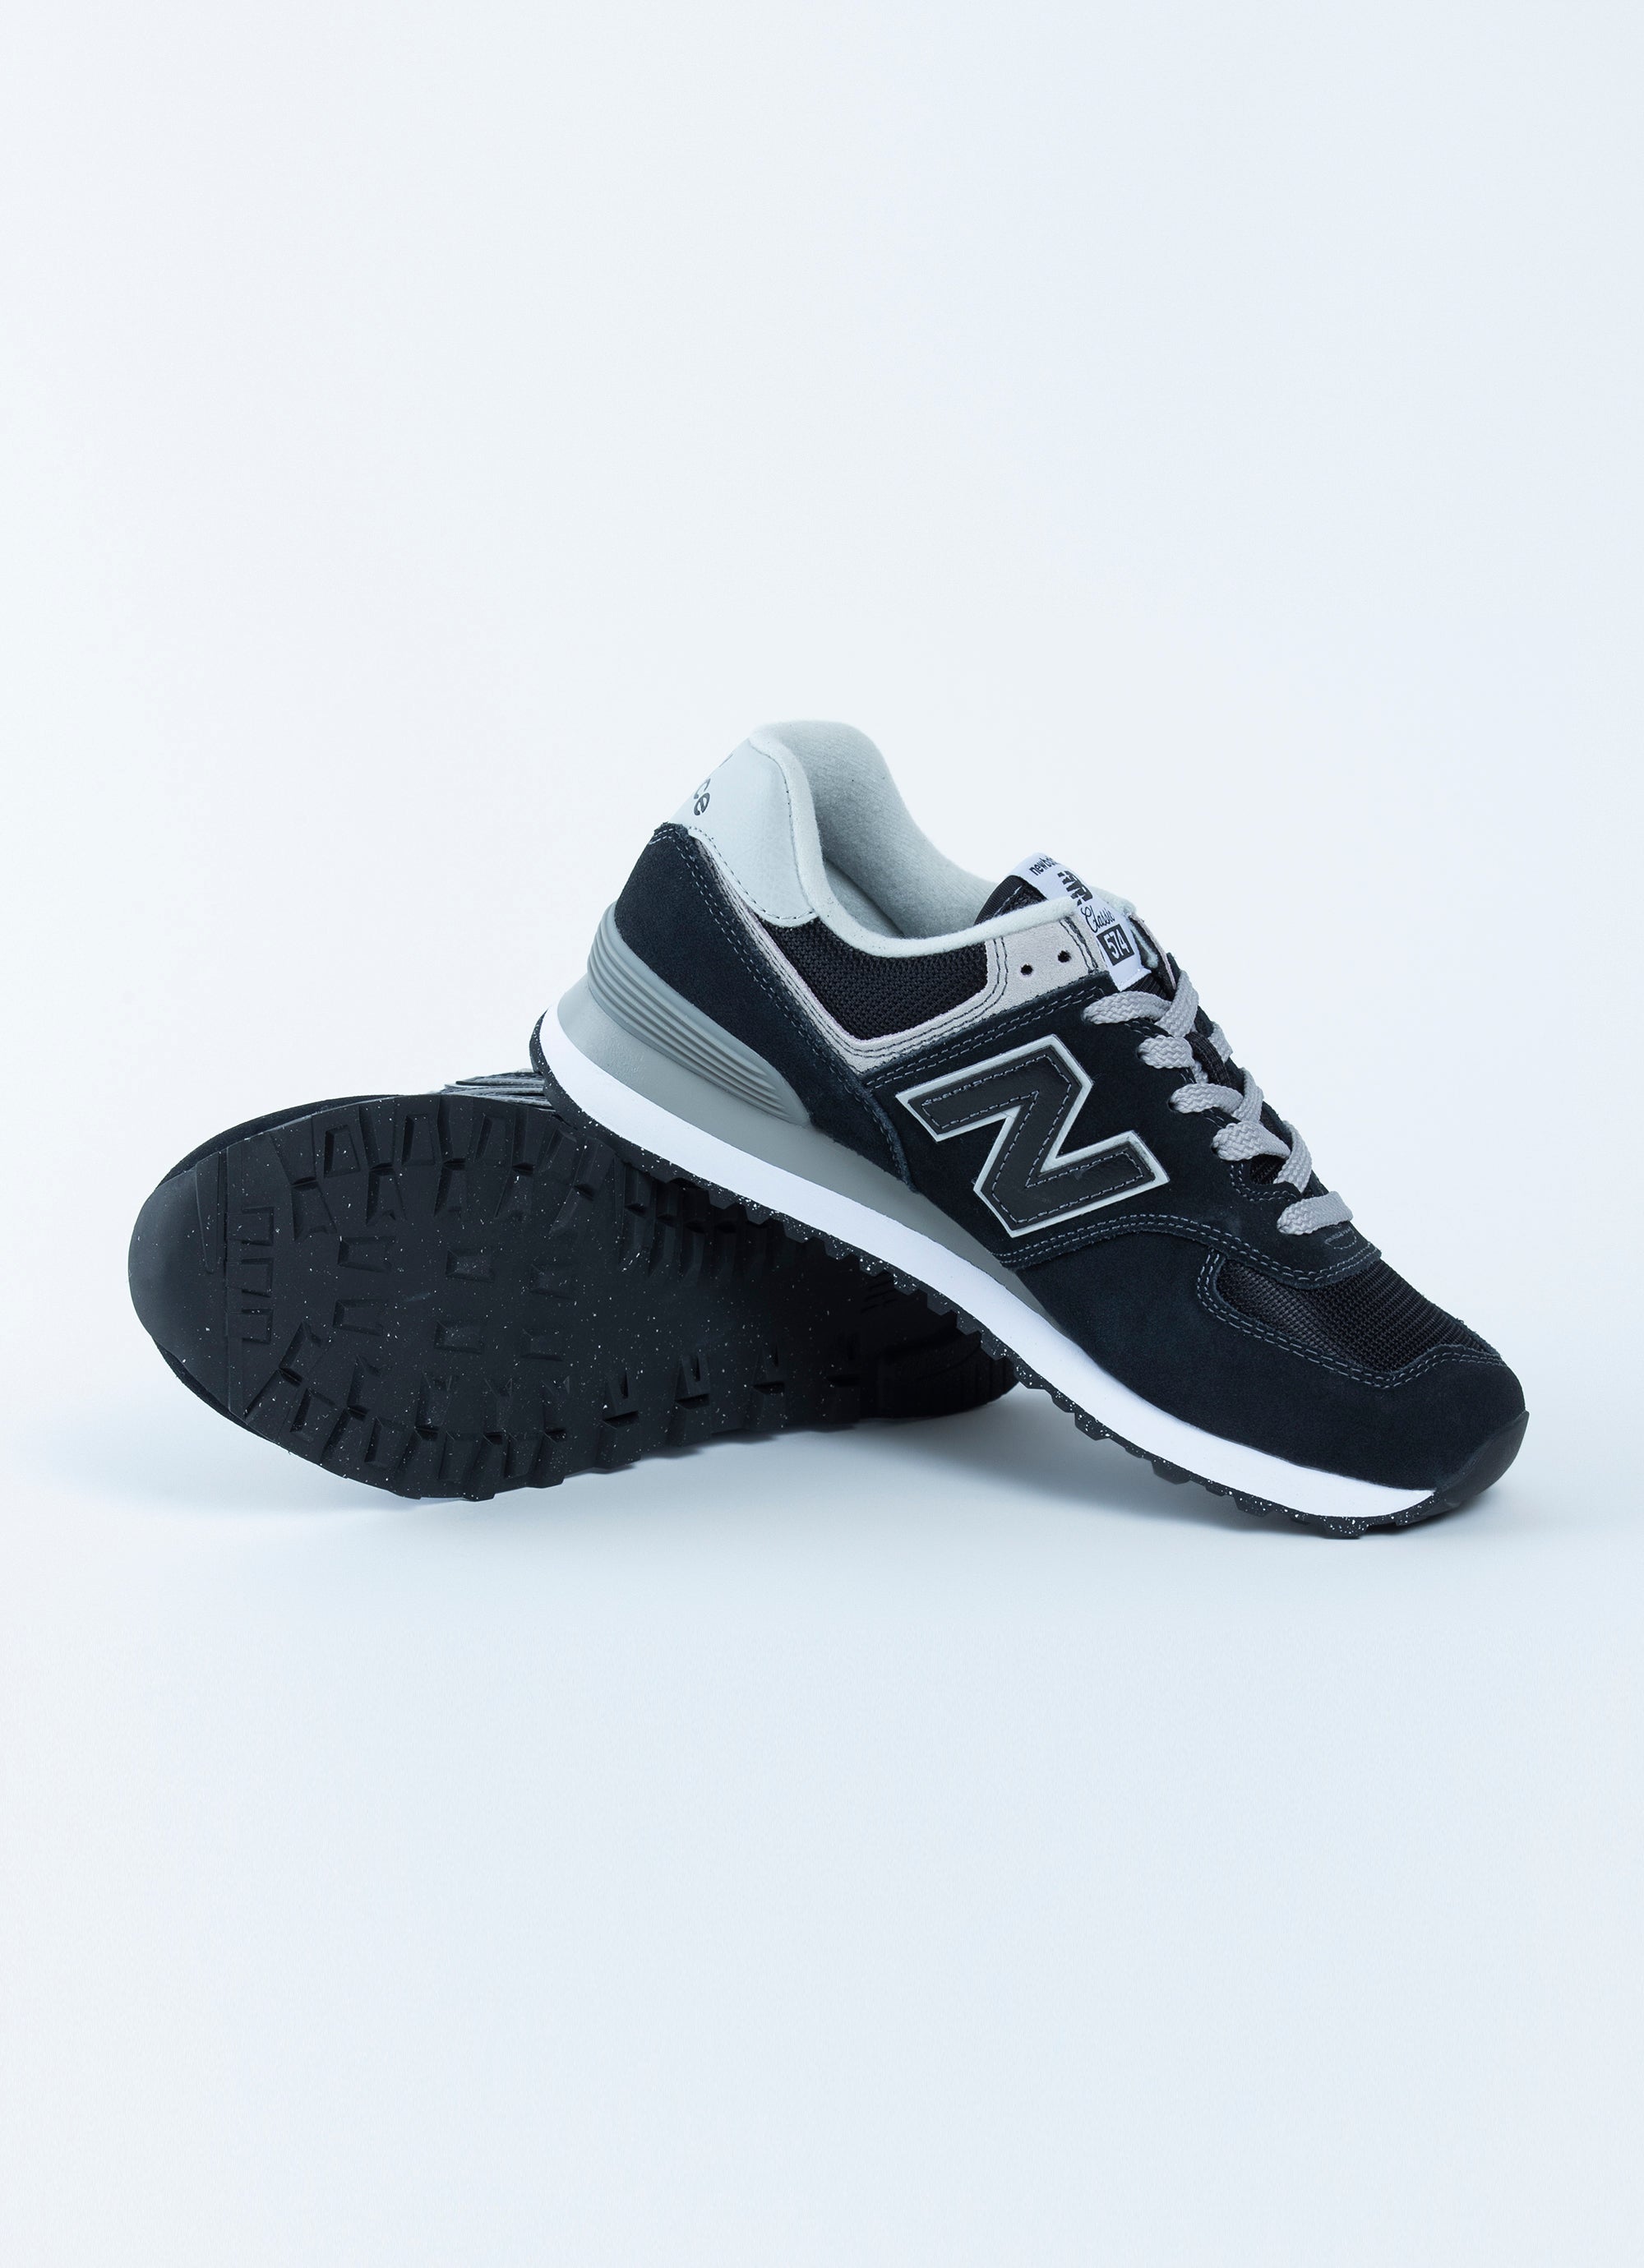 New Balance 574 Core Shoe - Womens in Black Red